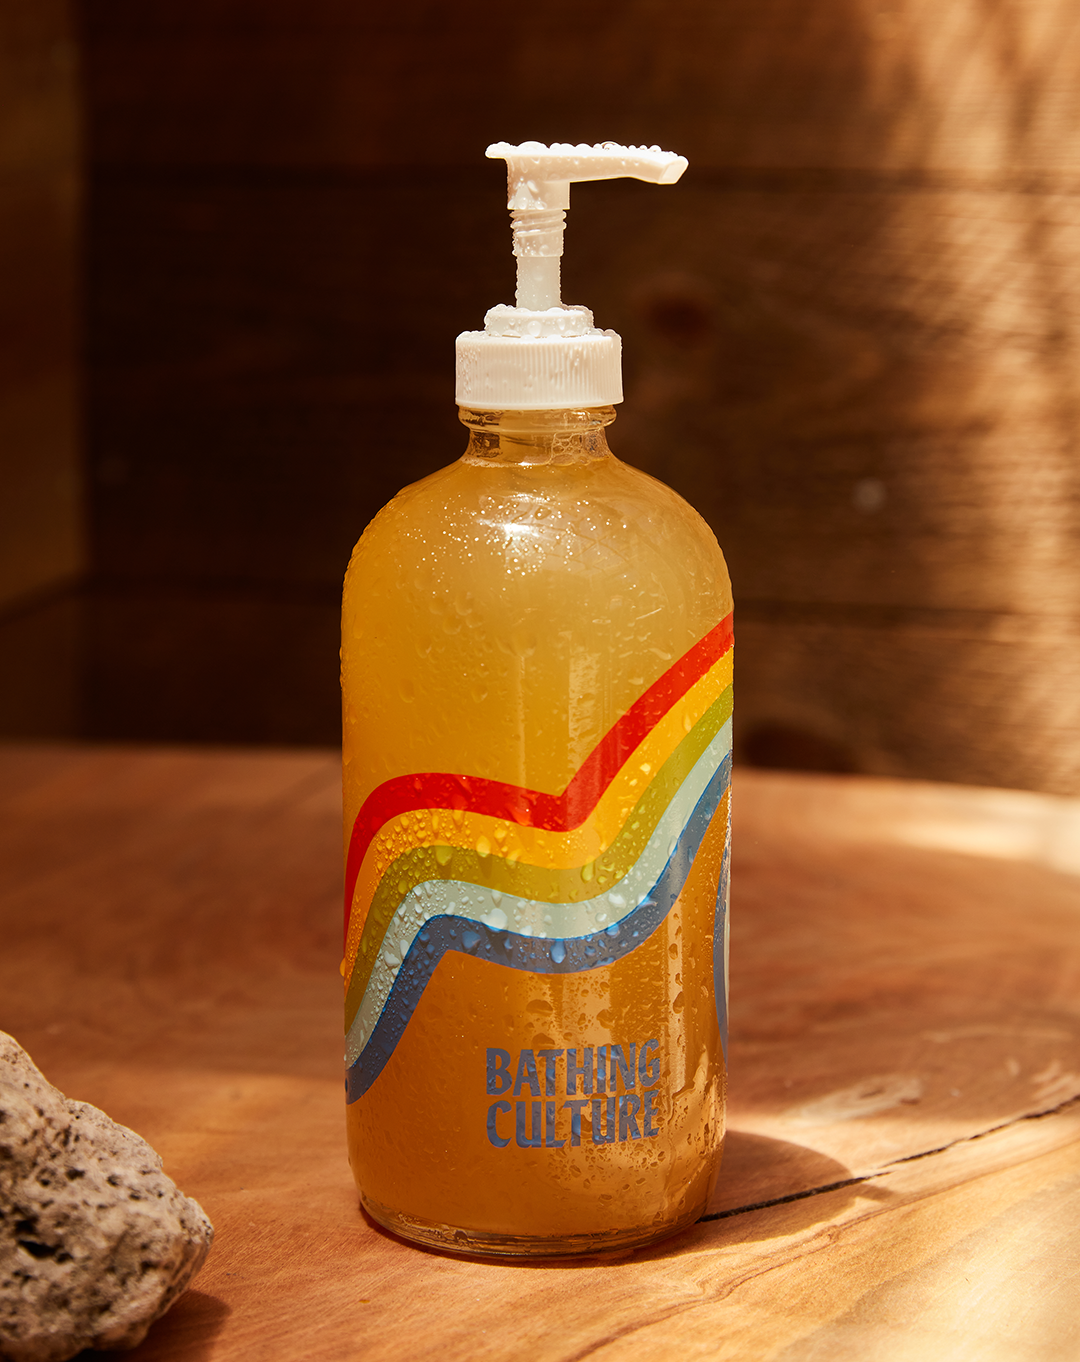 Mind & body wash by bathing culture / Respect yourself with naturally radical, certified-organic, all-purpose soap in a refillable rainbow glass bottle. One small dab of this concentrated formula will lather liberally - Use in the shower or bath to cleanse. Cathedral Grove Scent - transports you to the Redwood canopies of Northern California